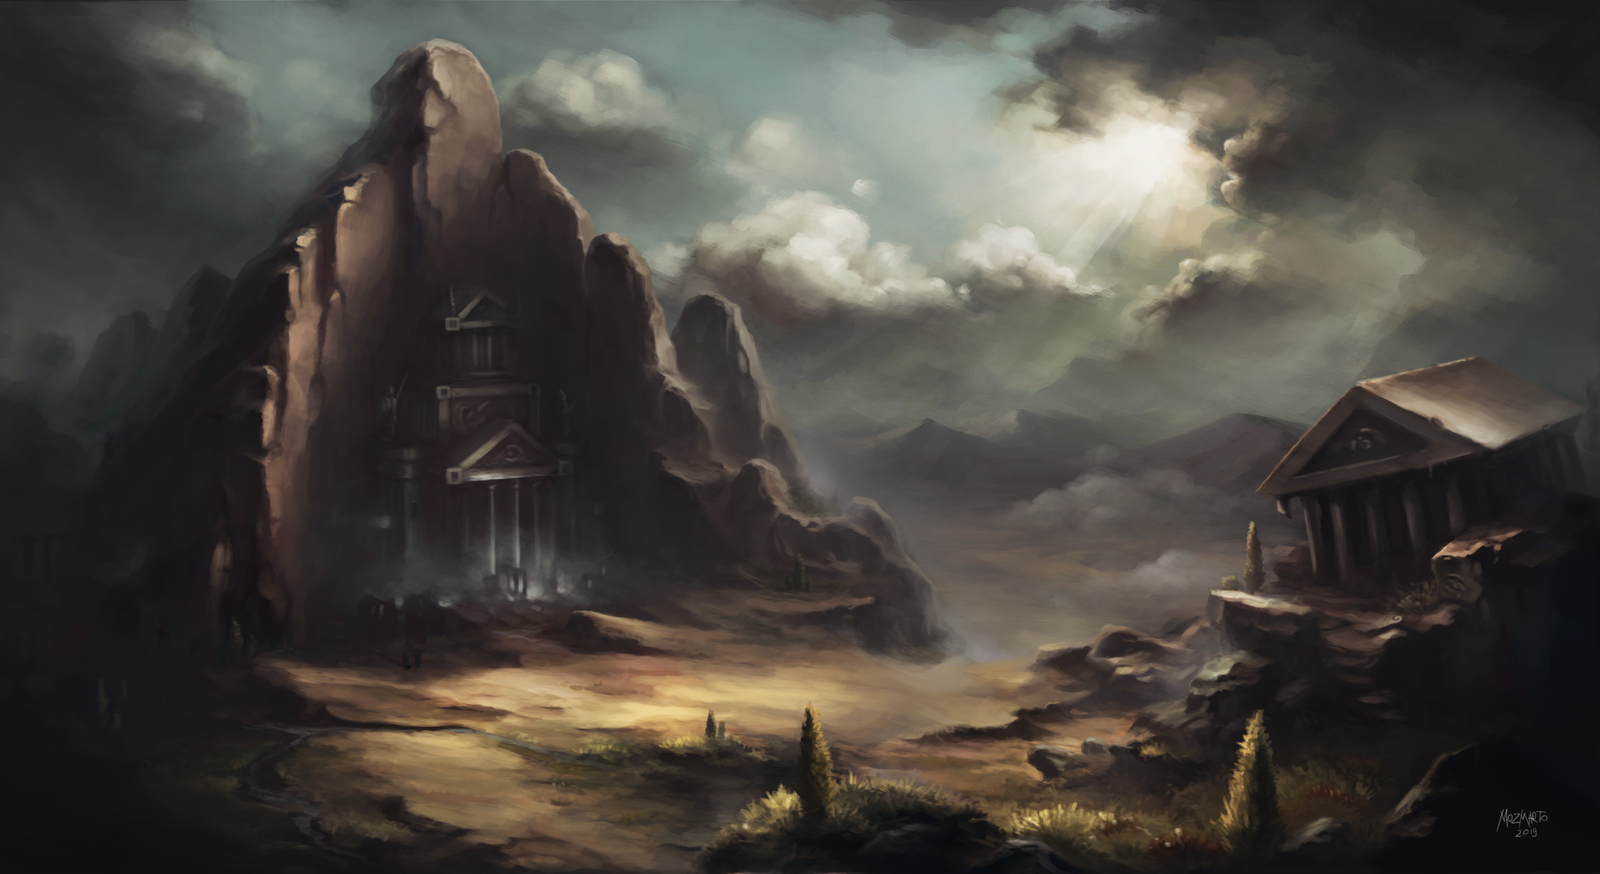 Valley - My, Drawing, Landscape, Illustrations, Art, Fantasy, Valley, The mountains, Digital drawing